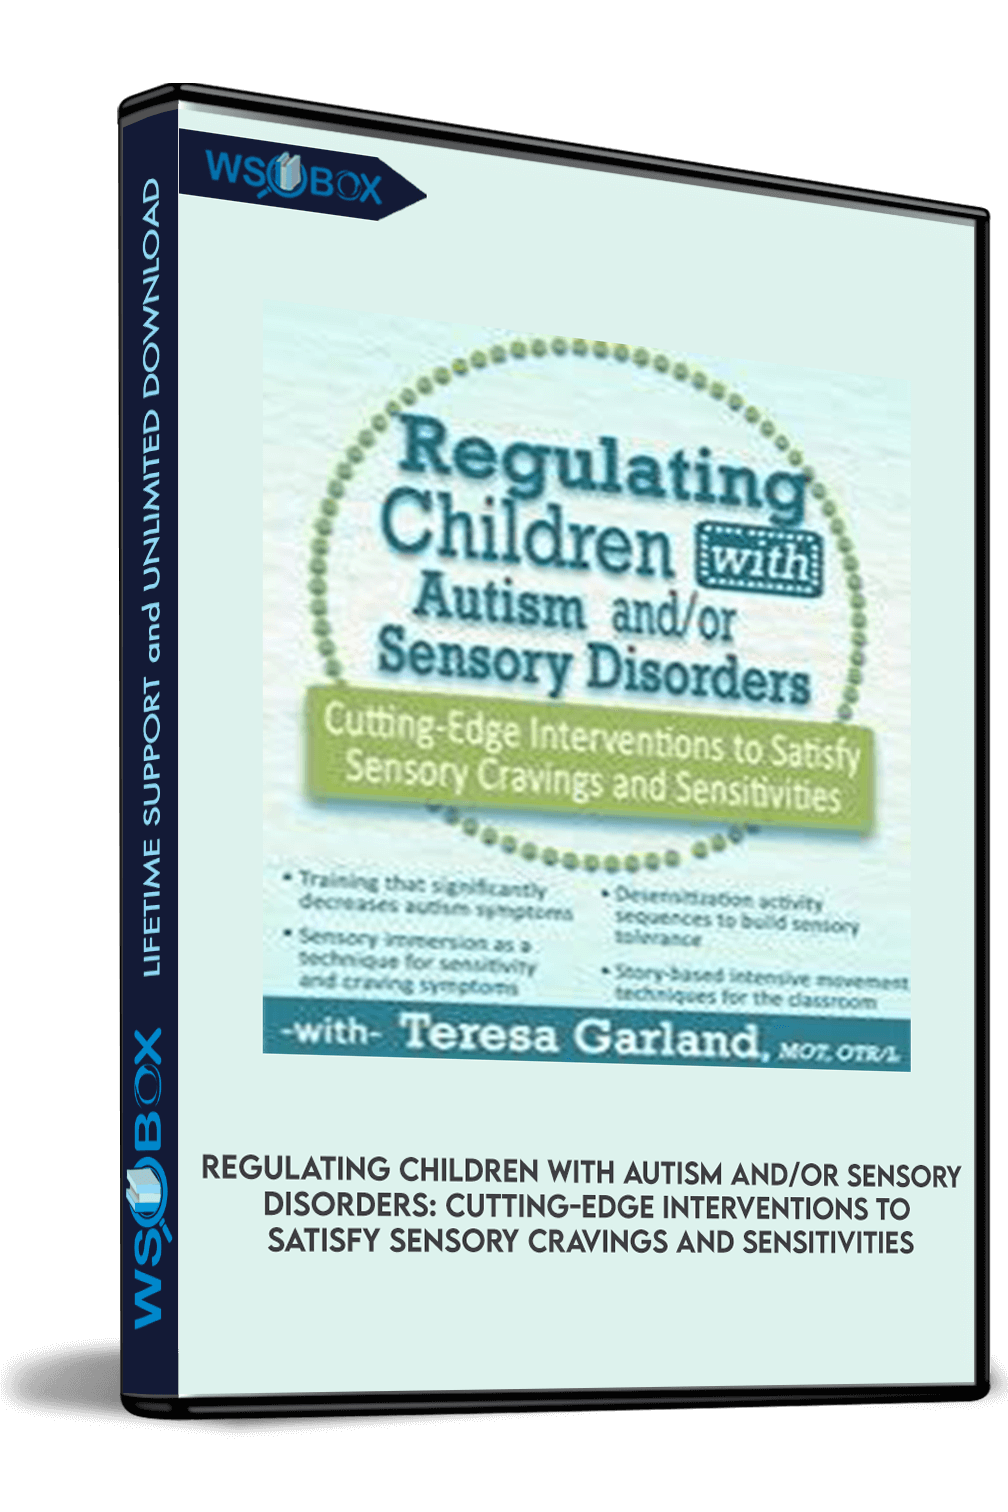 regulating-children-with-autism-and-or-sensory-disorders-cutting-edge-interventions-to-satisfy-sensory-cravings-and-sensitivities